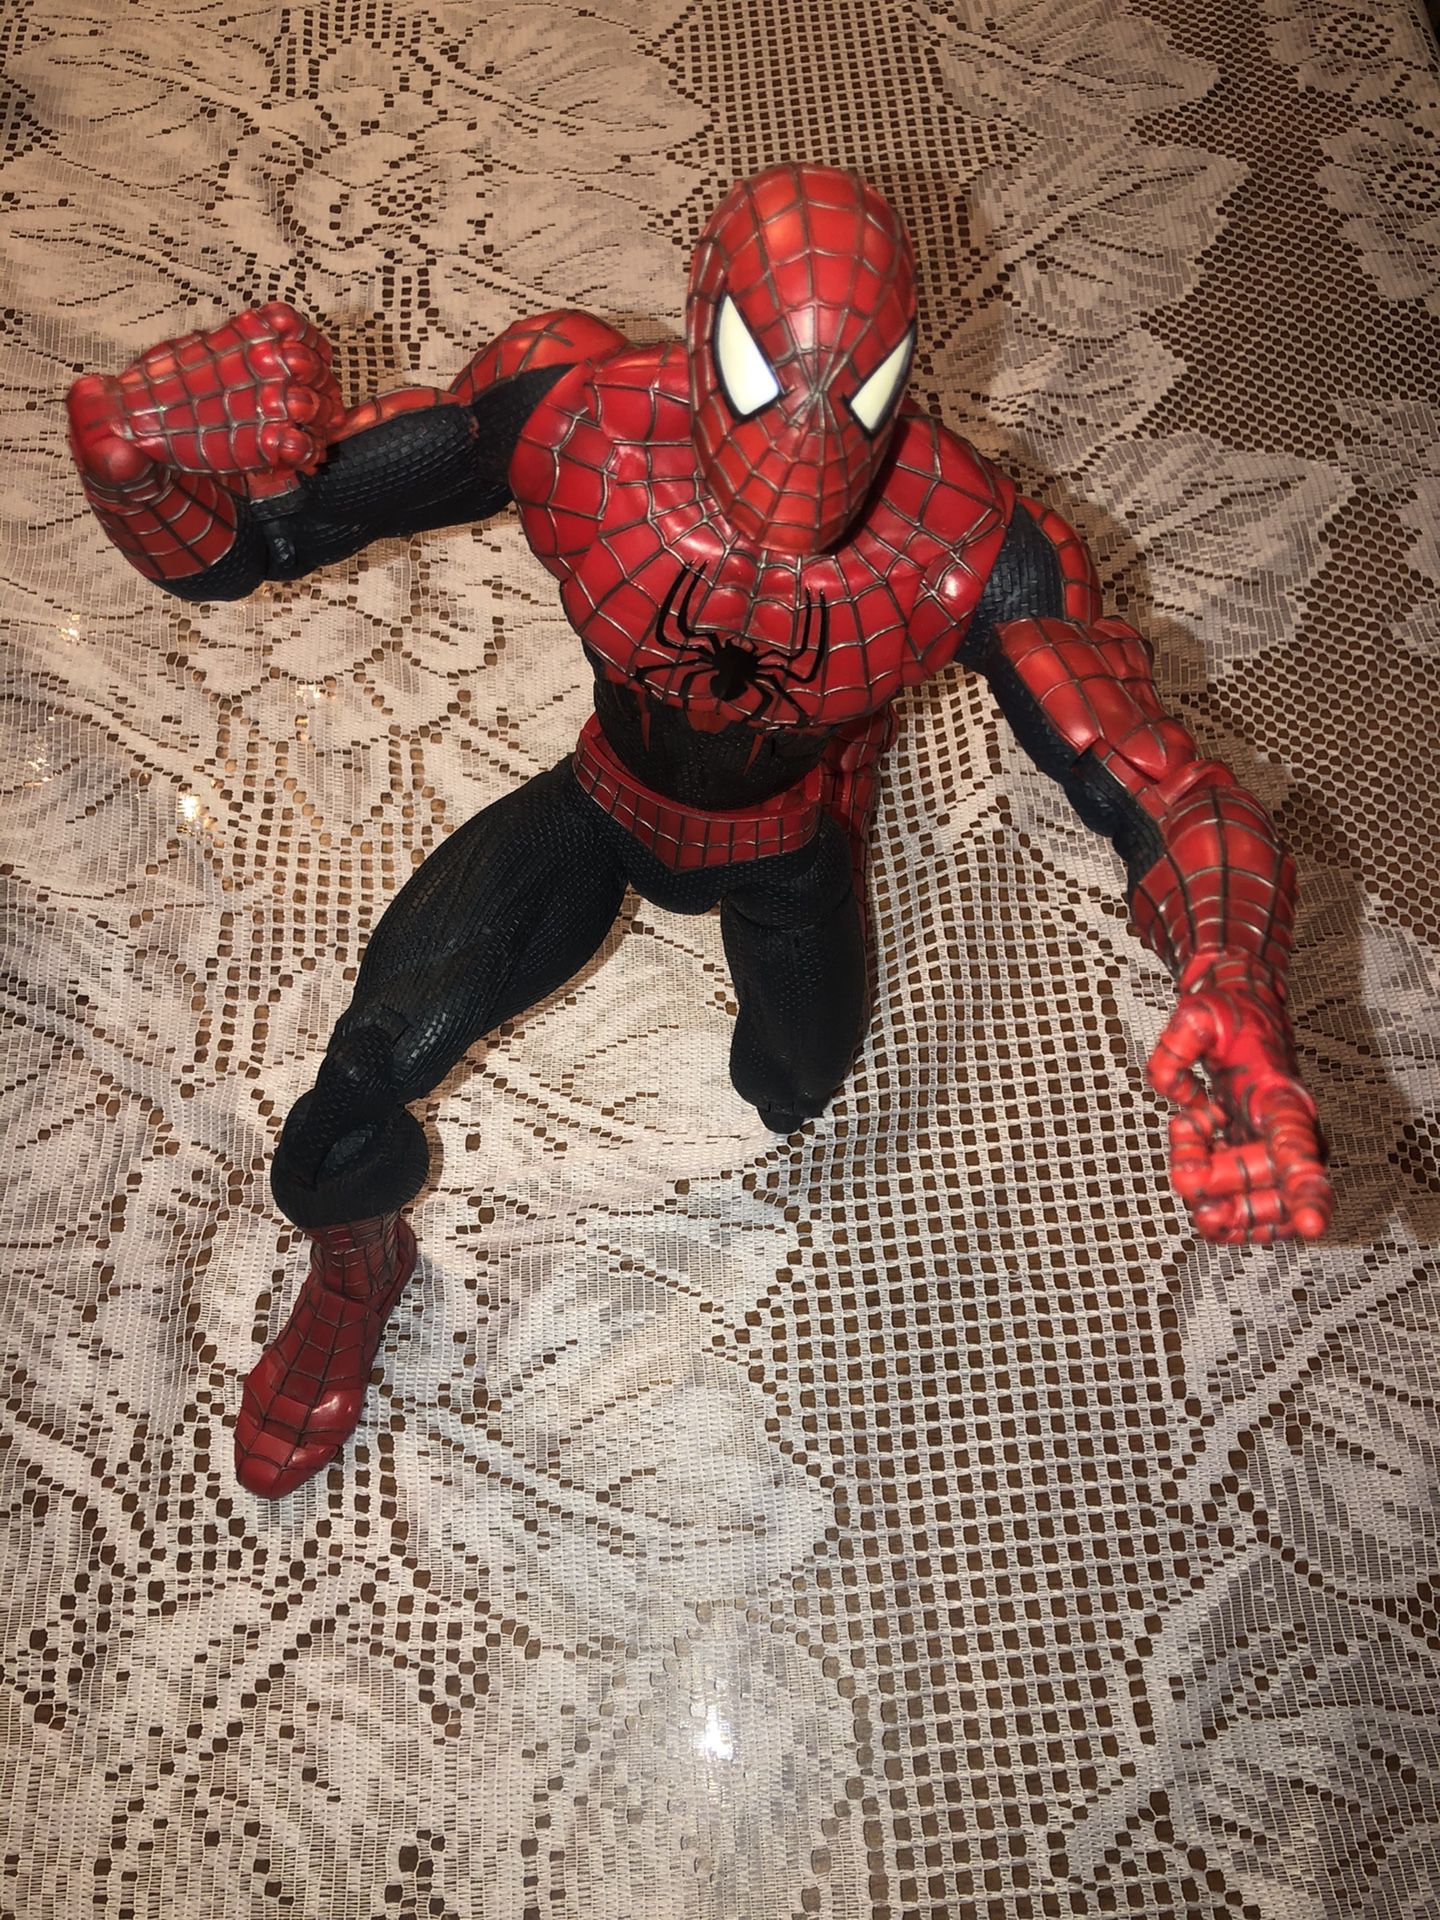 Poseable fully articulated Spiderman Action Figure